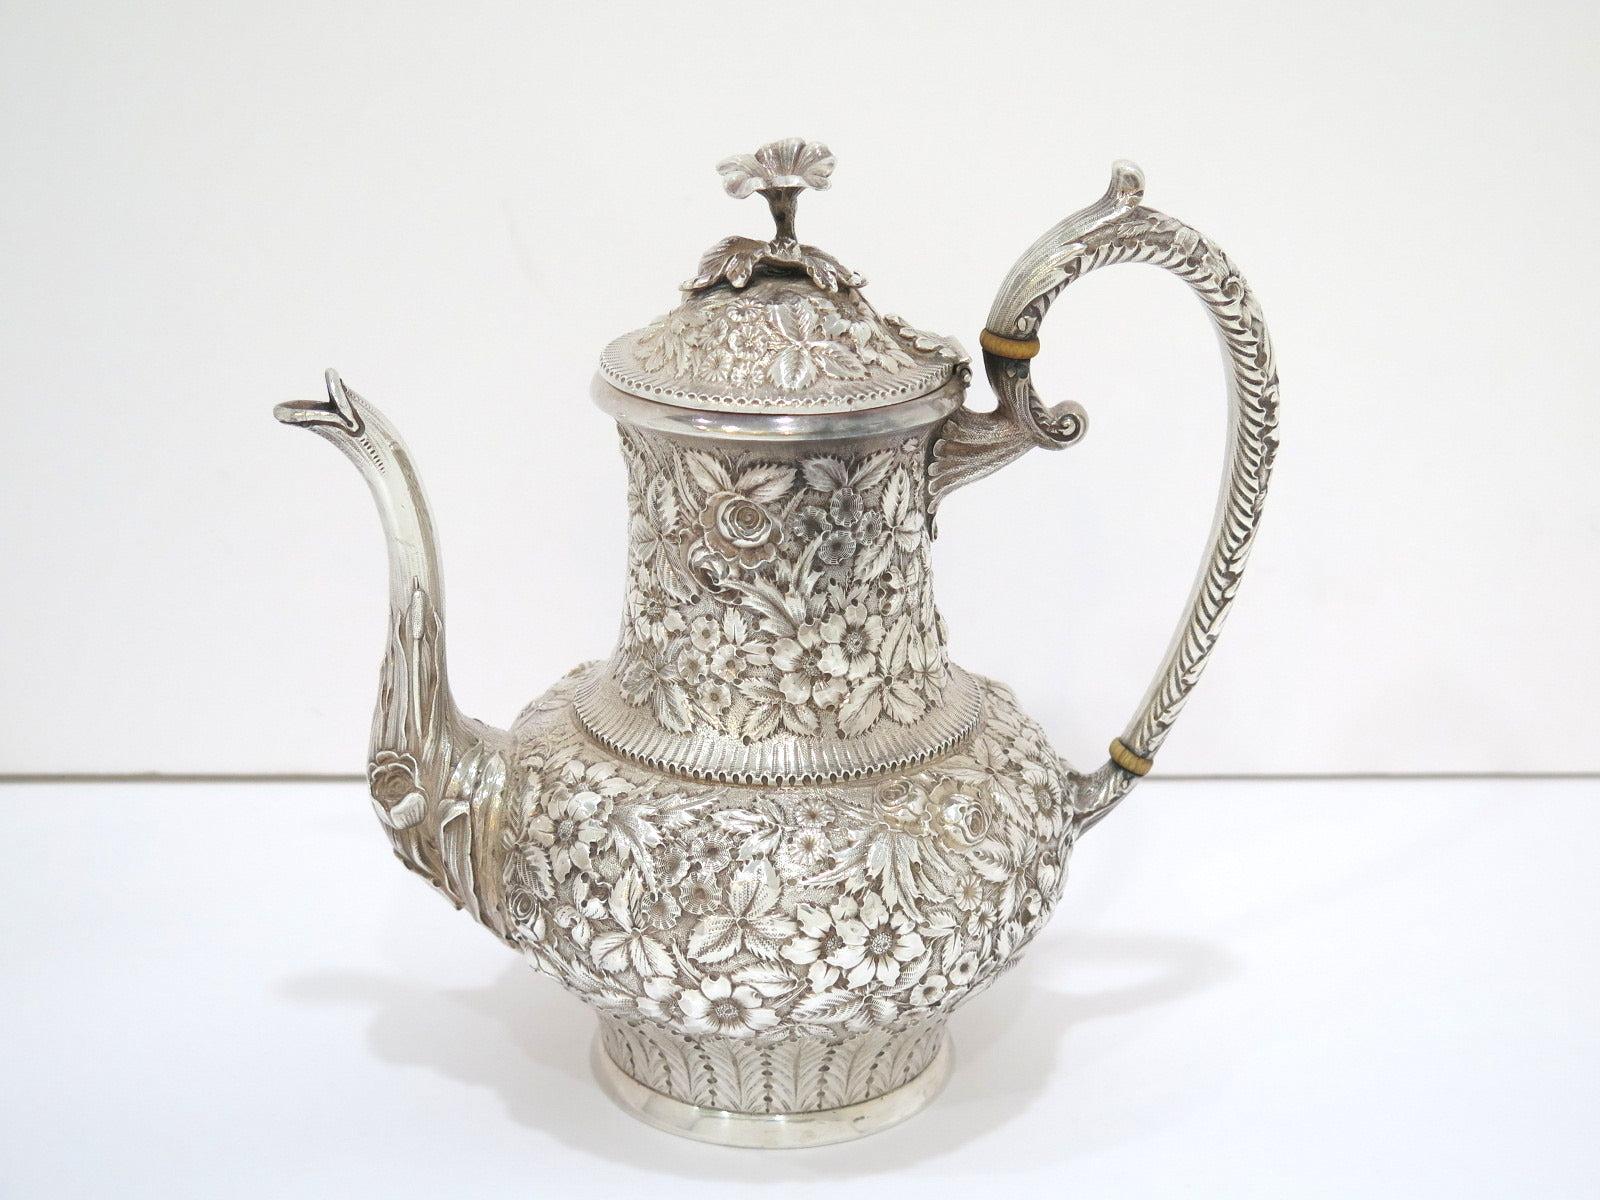 Teapot (h x l x d): 9 x 9 1/8 x 5.75 in

Sugar Bowl (h x l x d): 5 1/8 x 7.25 x 5 in

Creamer (h x l x d): 4 5/8 x 5.5 x 3 7/8 in

Total Weight: 55.5 toz

There is a monogram on the bottom.